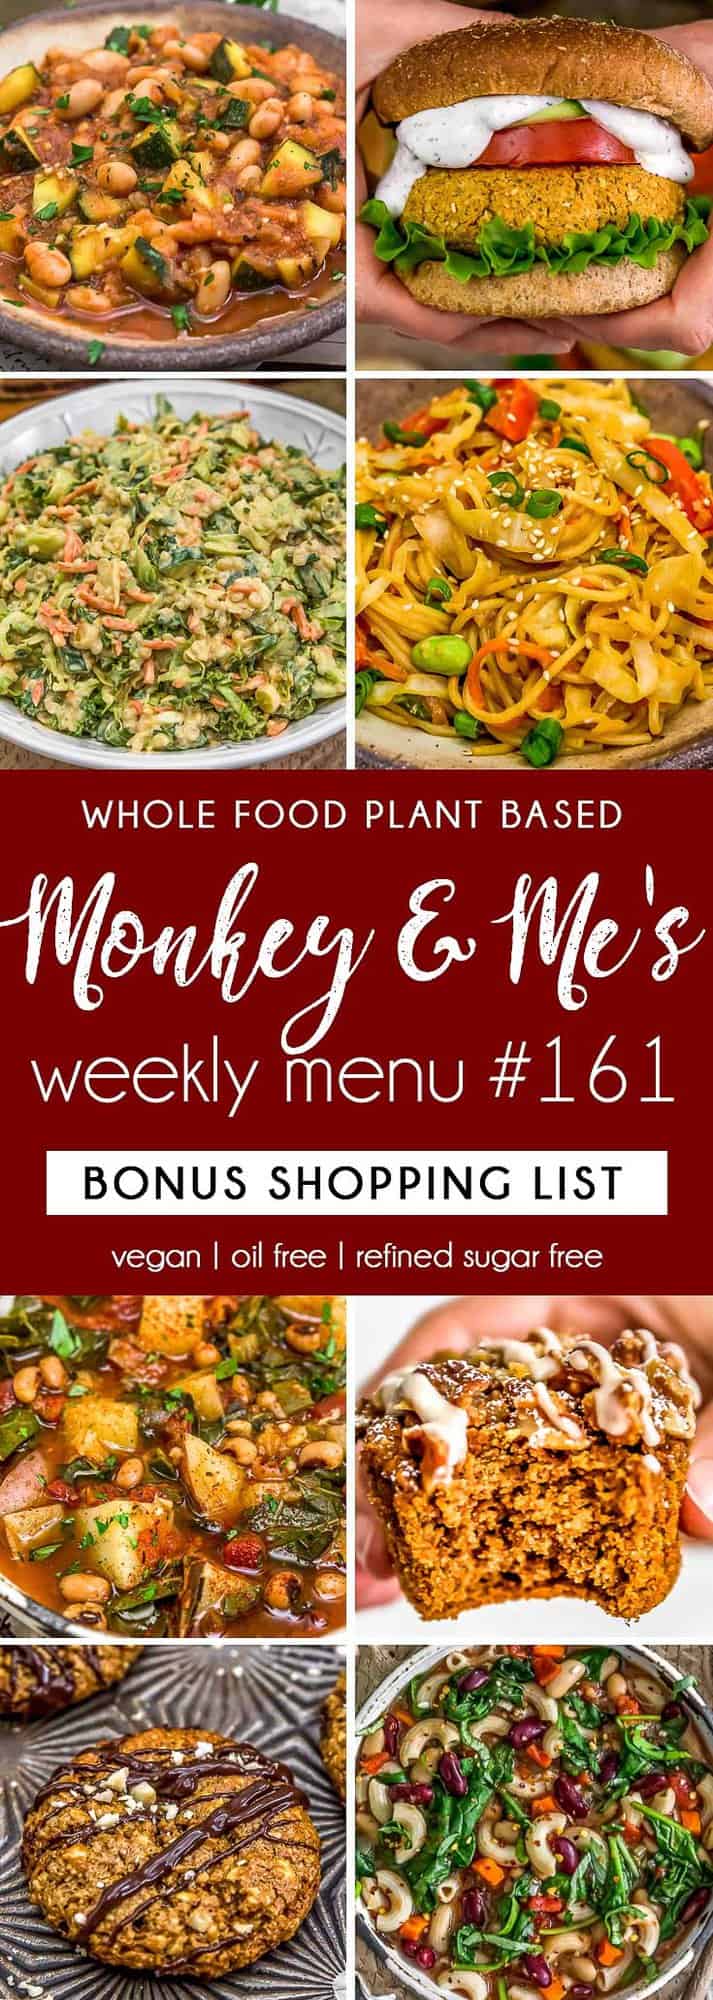 Monkey and Me's Menu 161 featuring 8 recipes